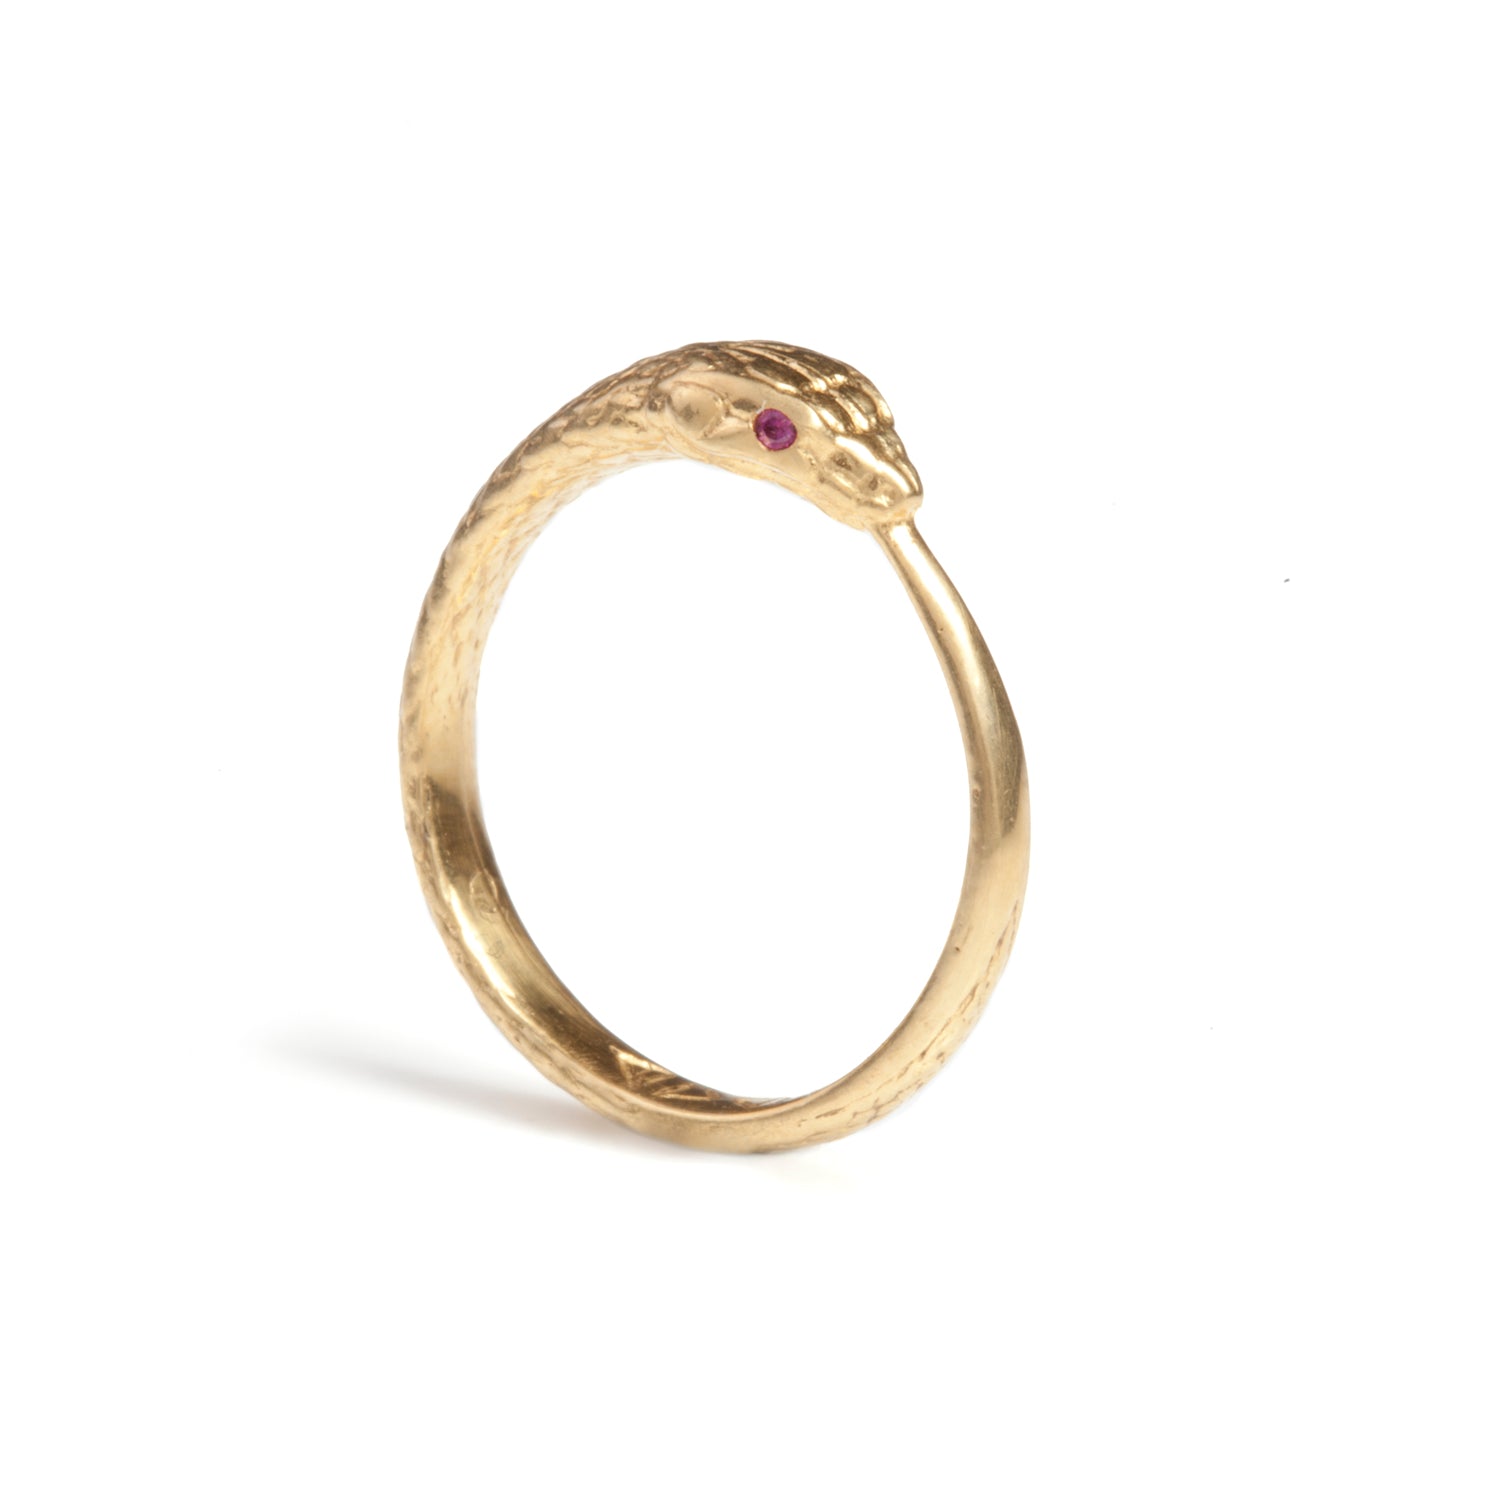 Rachel Entwistle Ouroboros Snake Ring Limited Edition With Rubies - J / Gold Vermeil